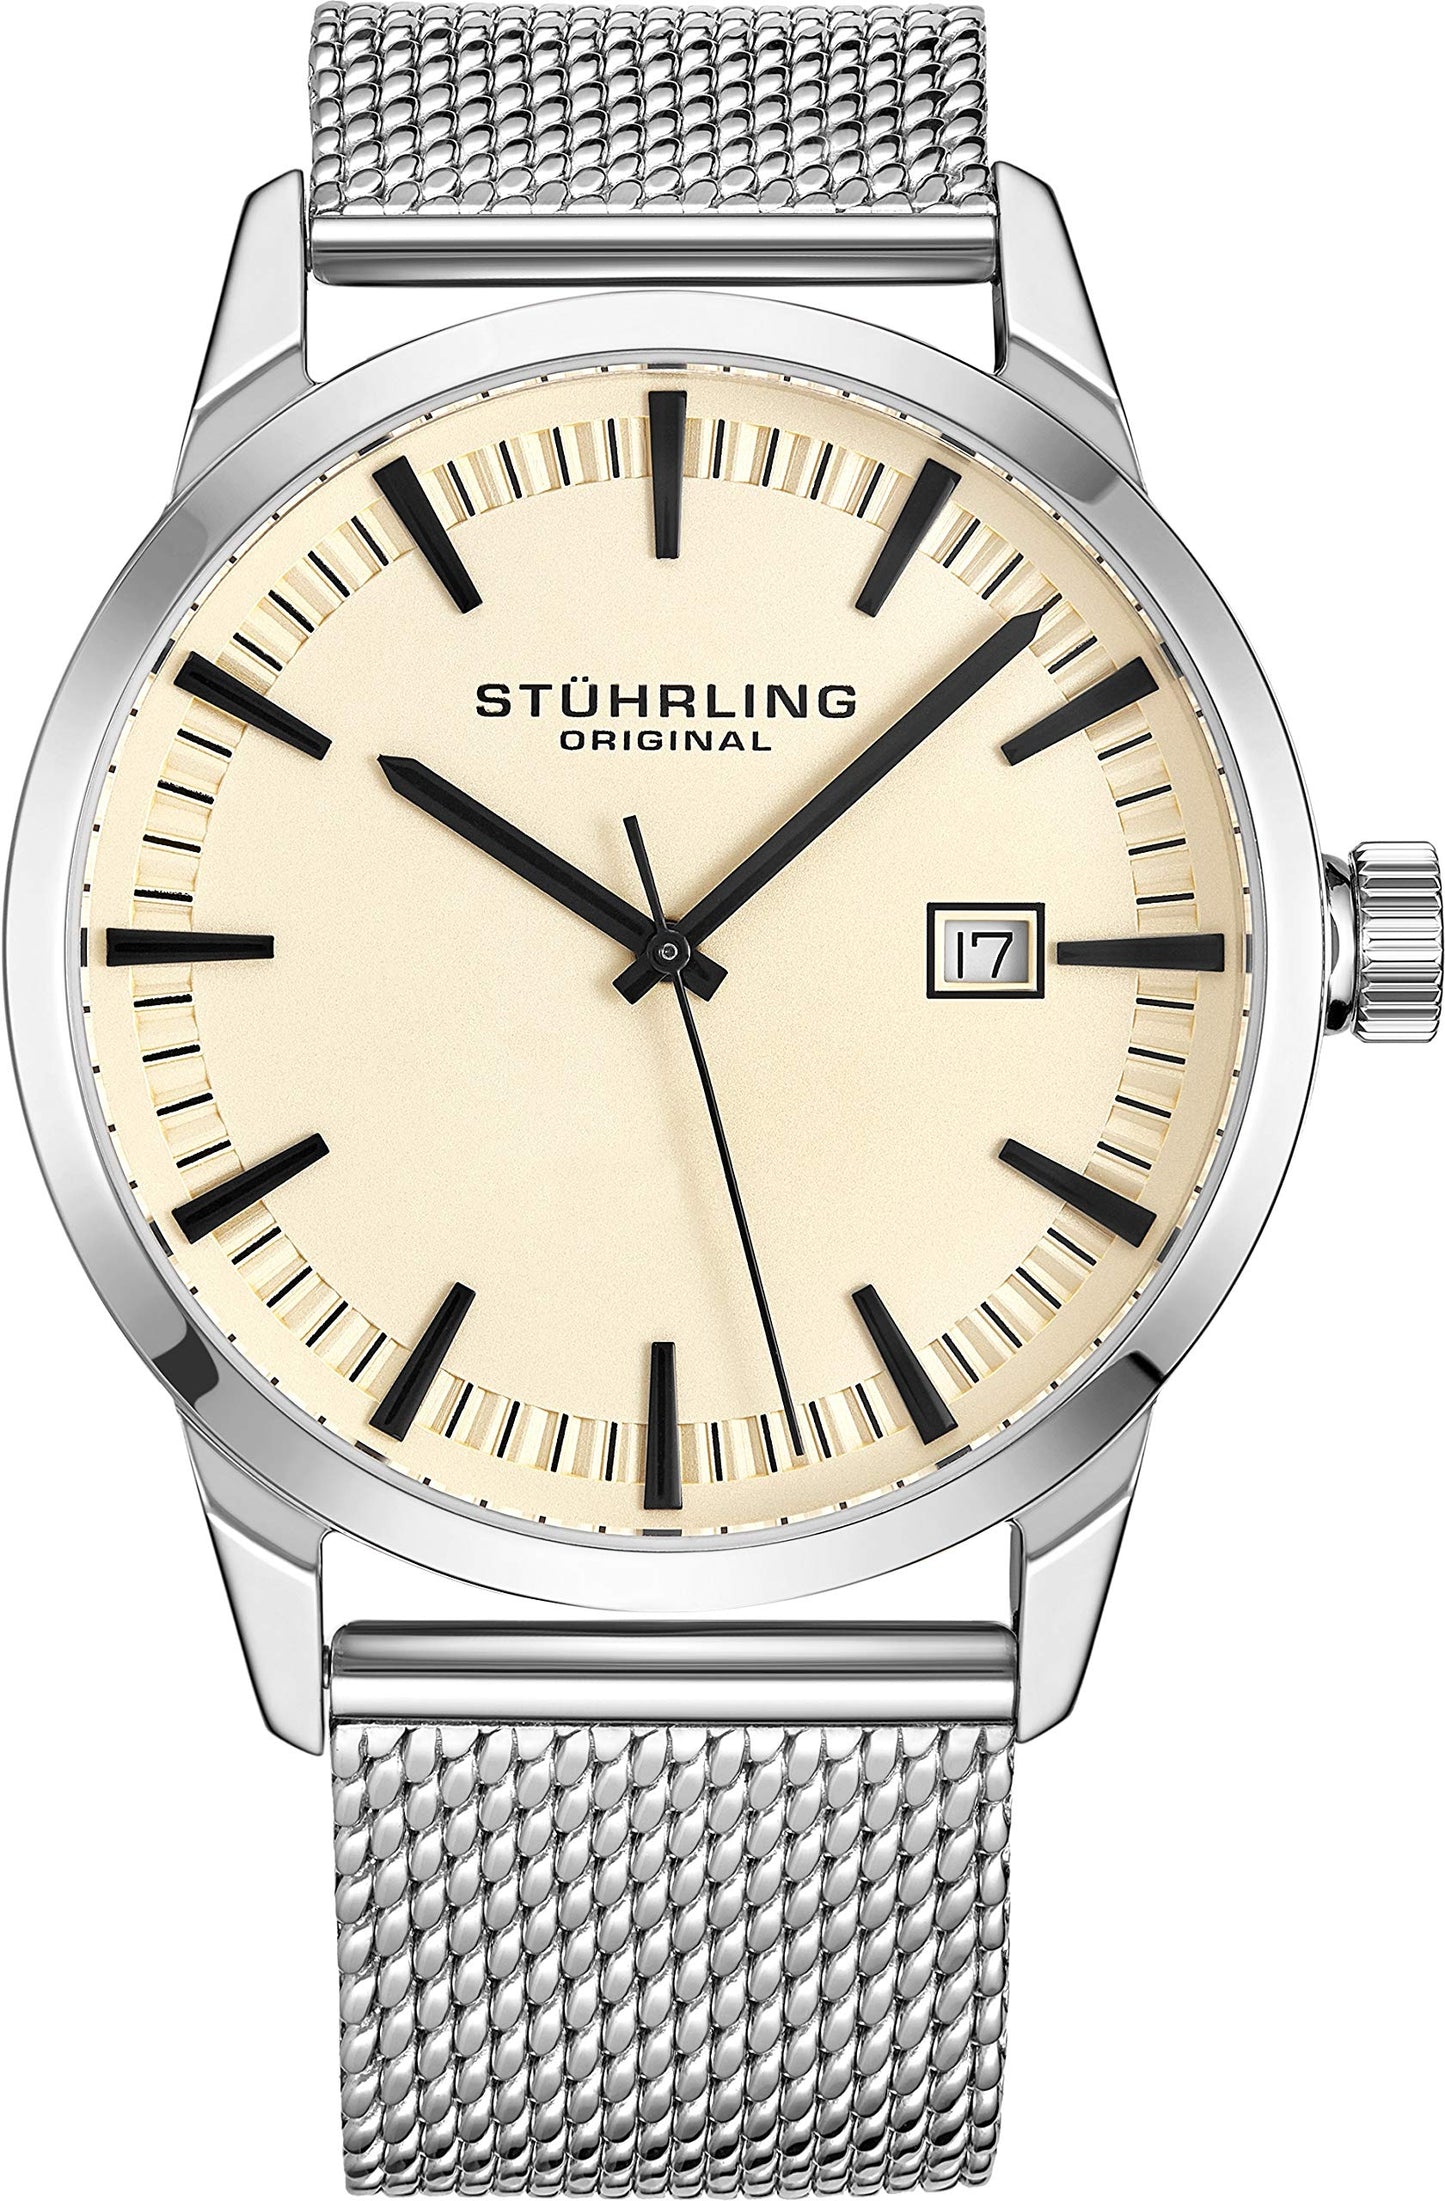 Stuhrling Original Mens Watch Mesh Band - Dress + Casual Design - Analog Watch Dial with Date, 555 Watches for Men Collection (Beige)